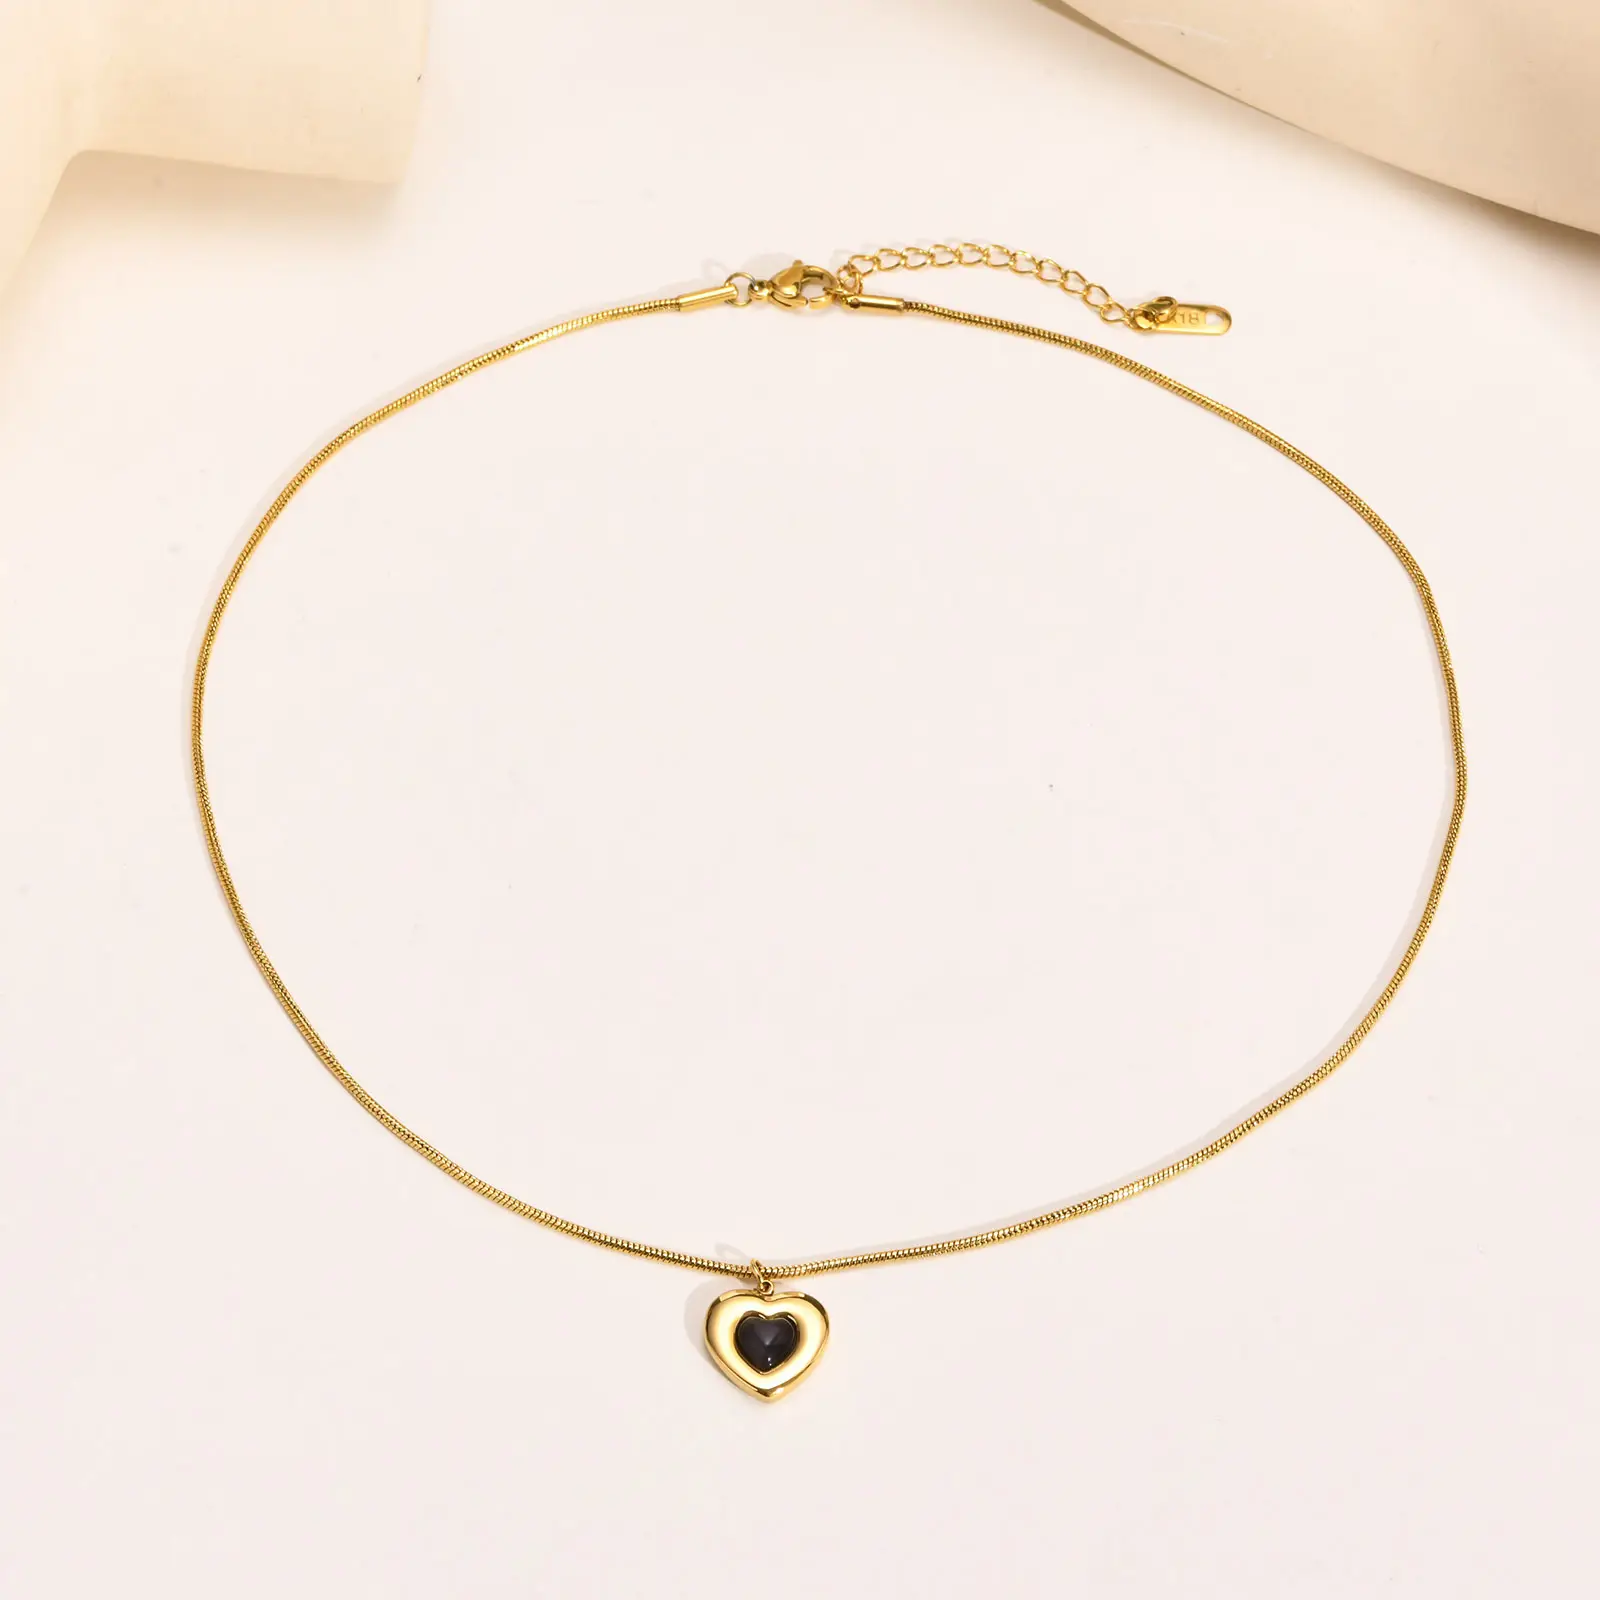 Fashion Jewelry 18K Gold Plated Stainless Steel Heart Black Pendant Choker Necklace For Women NC-1225